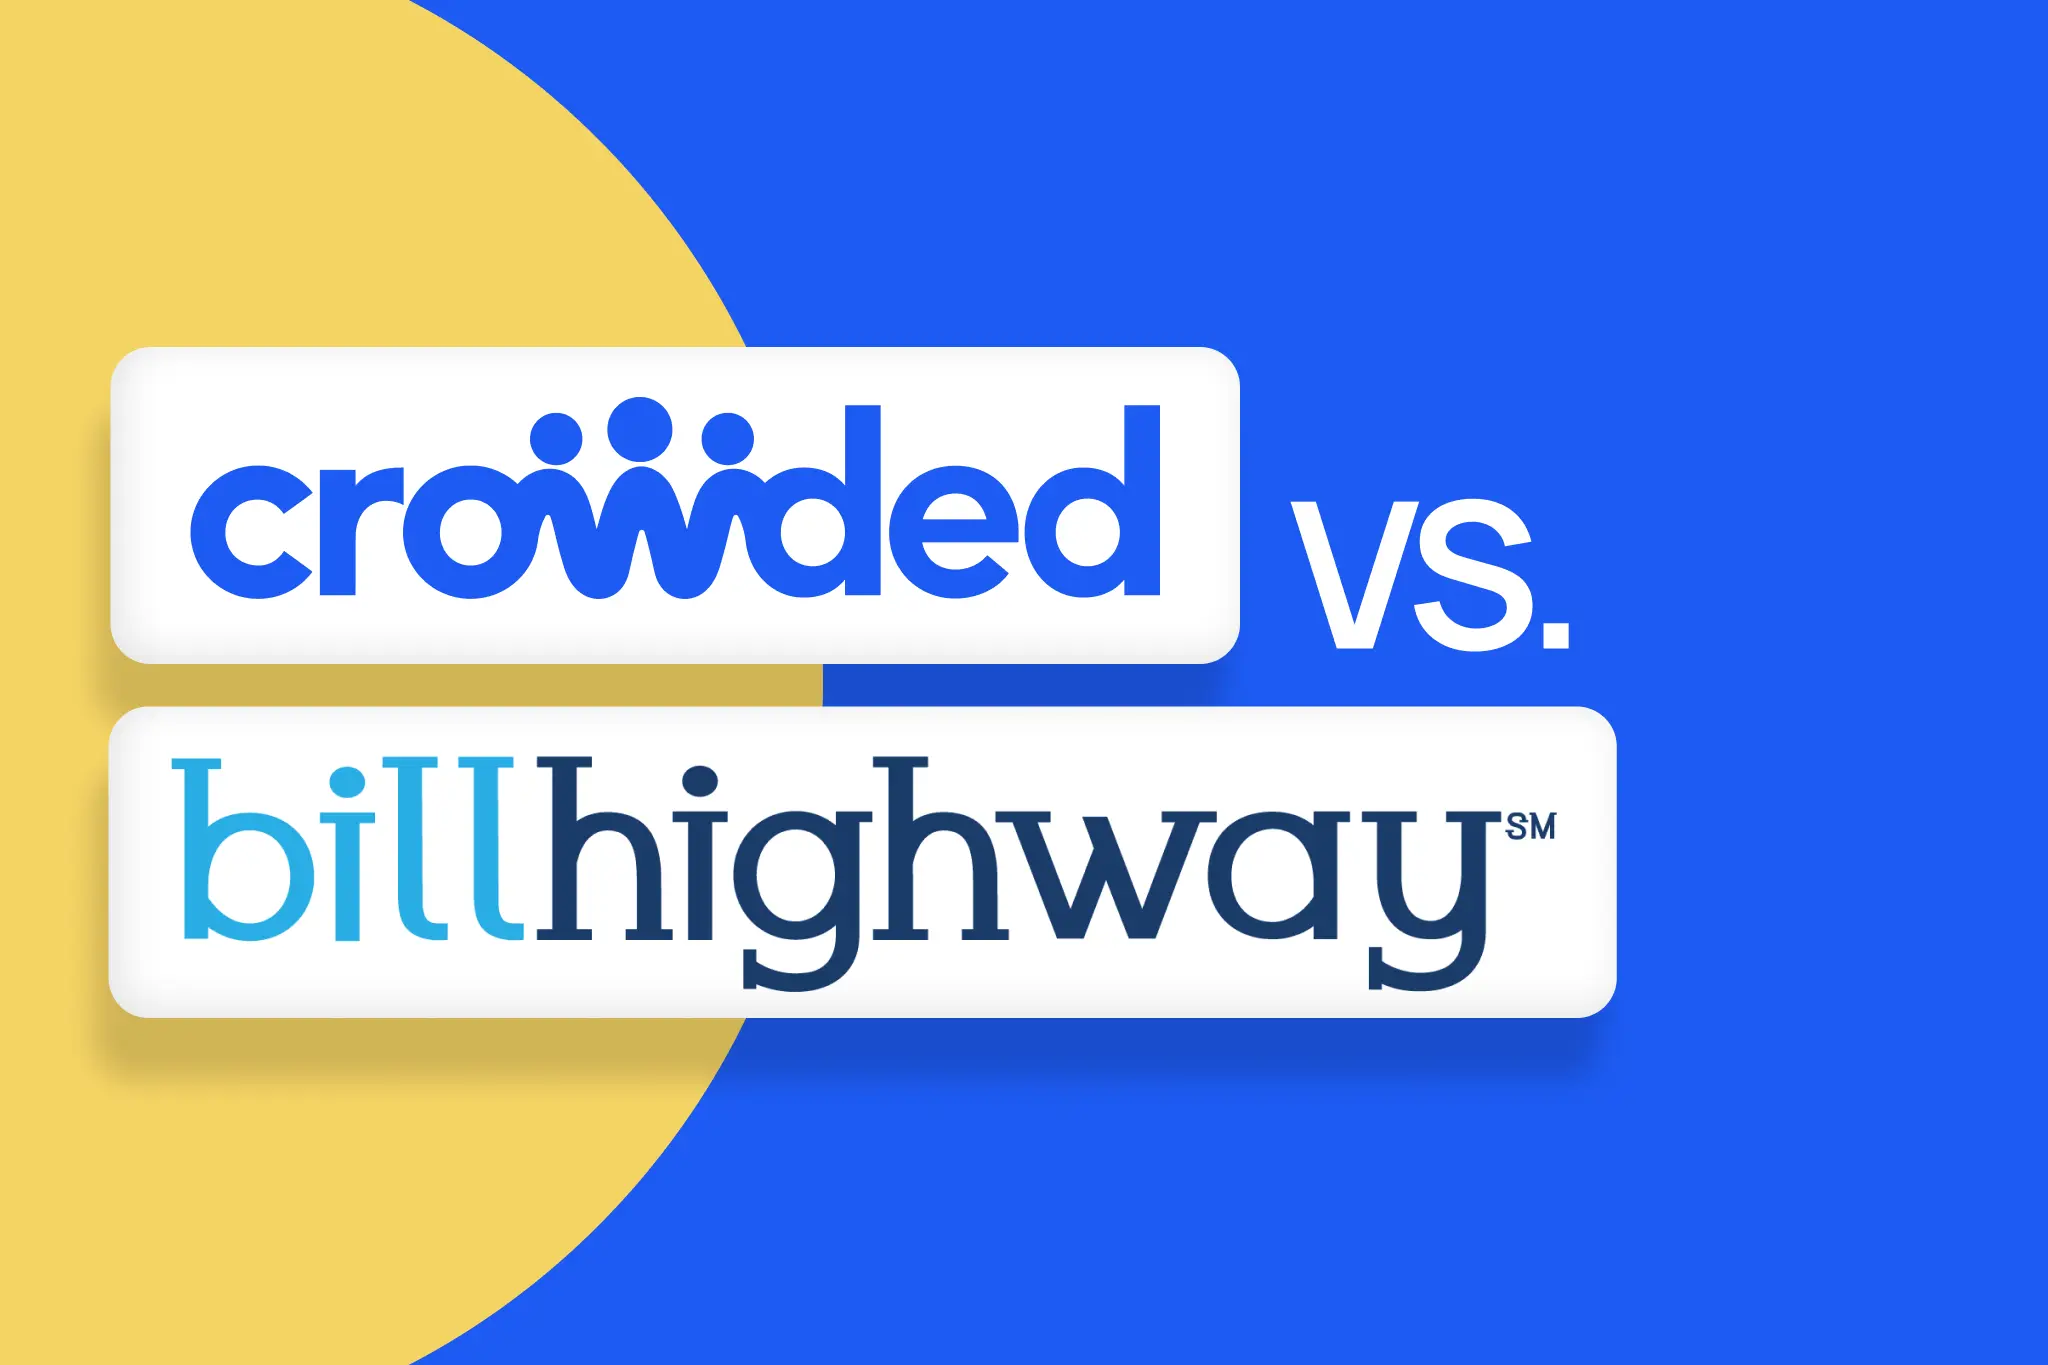 There are ways where Crowded and Billhighway’s services overlap, but overall Crowded offers more financial services than Billhighway. They both offer nonprofits a way to bank and collect money and a way to spend that money, but Crowded offers more features, flexibility, and financial security.